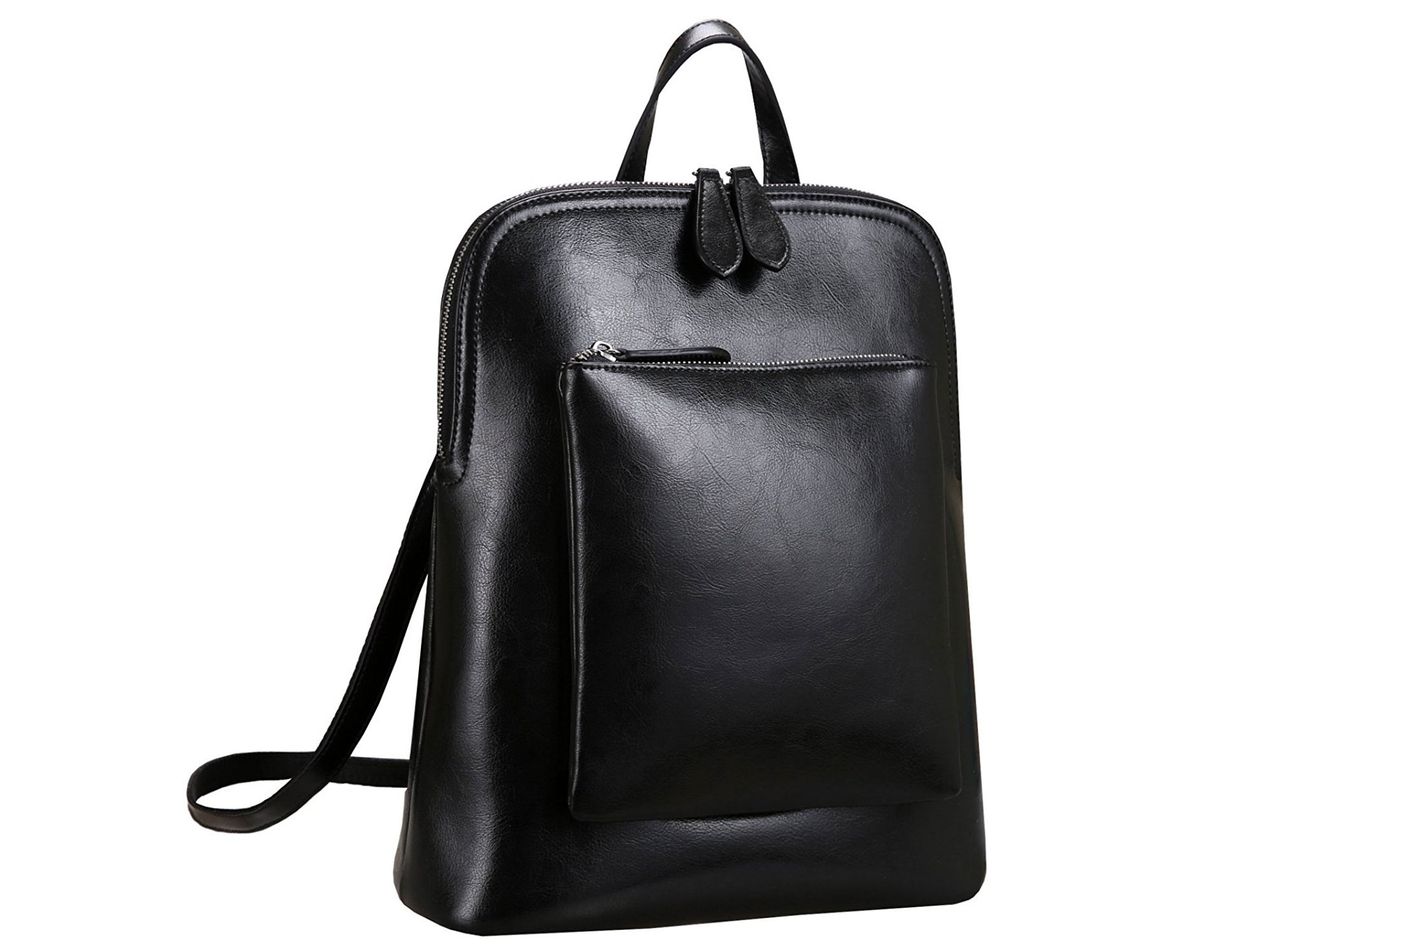 Best Black Leather Laptop Backpack | Literacy Ontario Central South